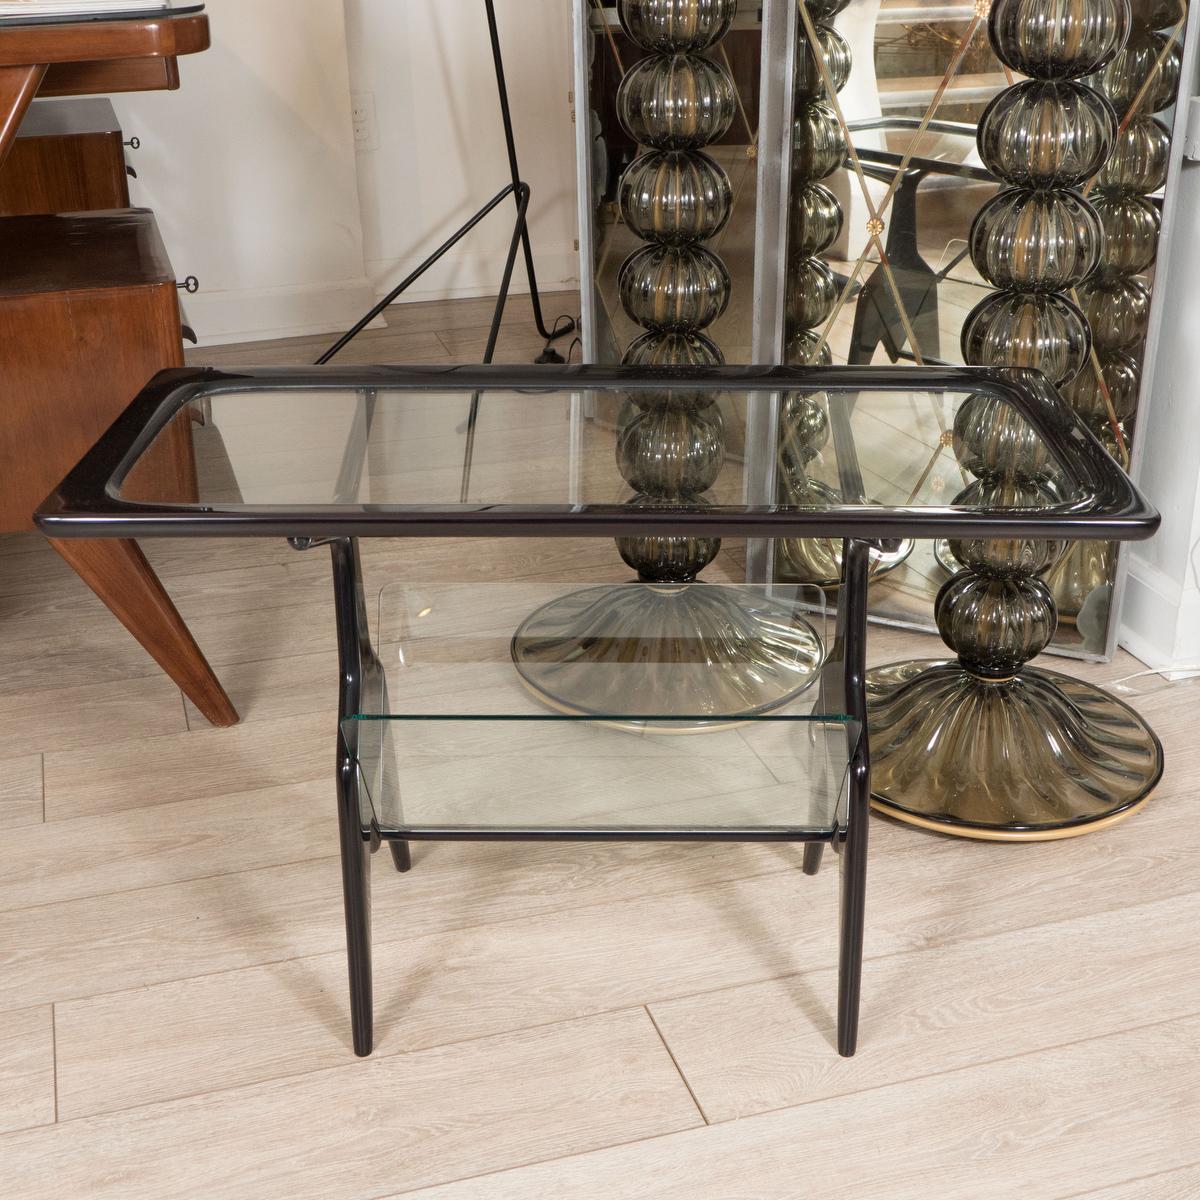 Mid-Century Modern Ebonized Wood Table with Glass Inserts For Sale